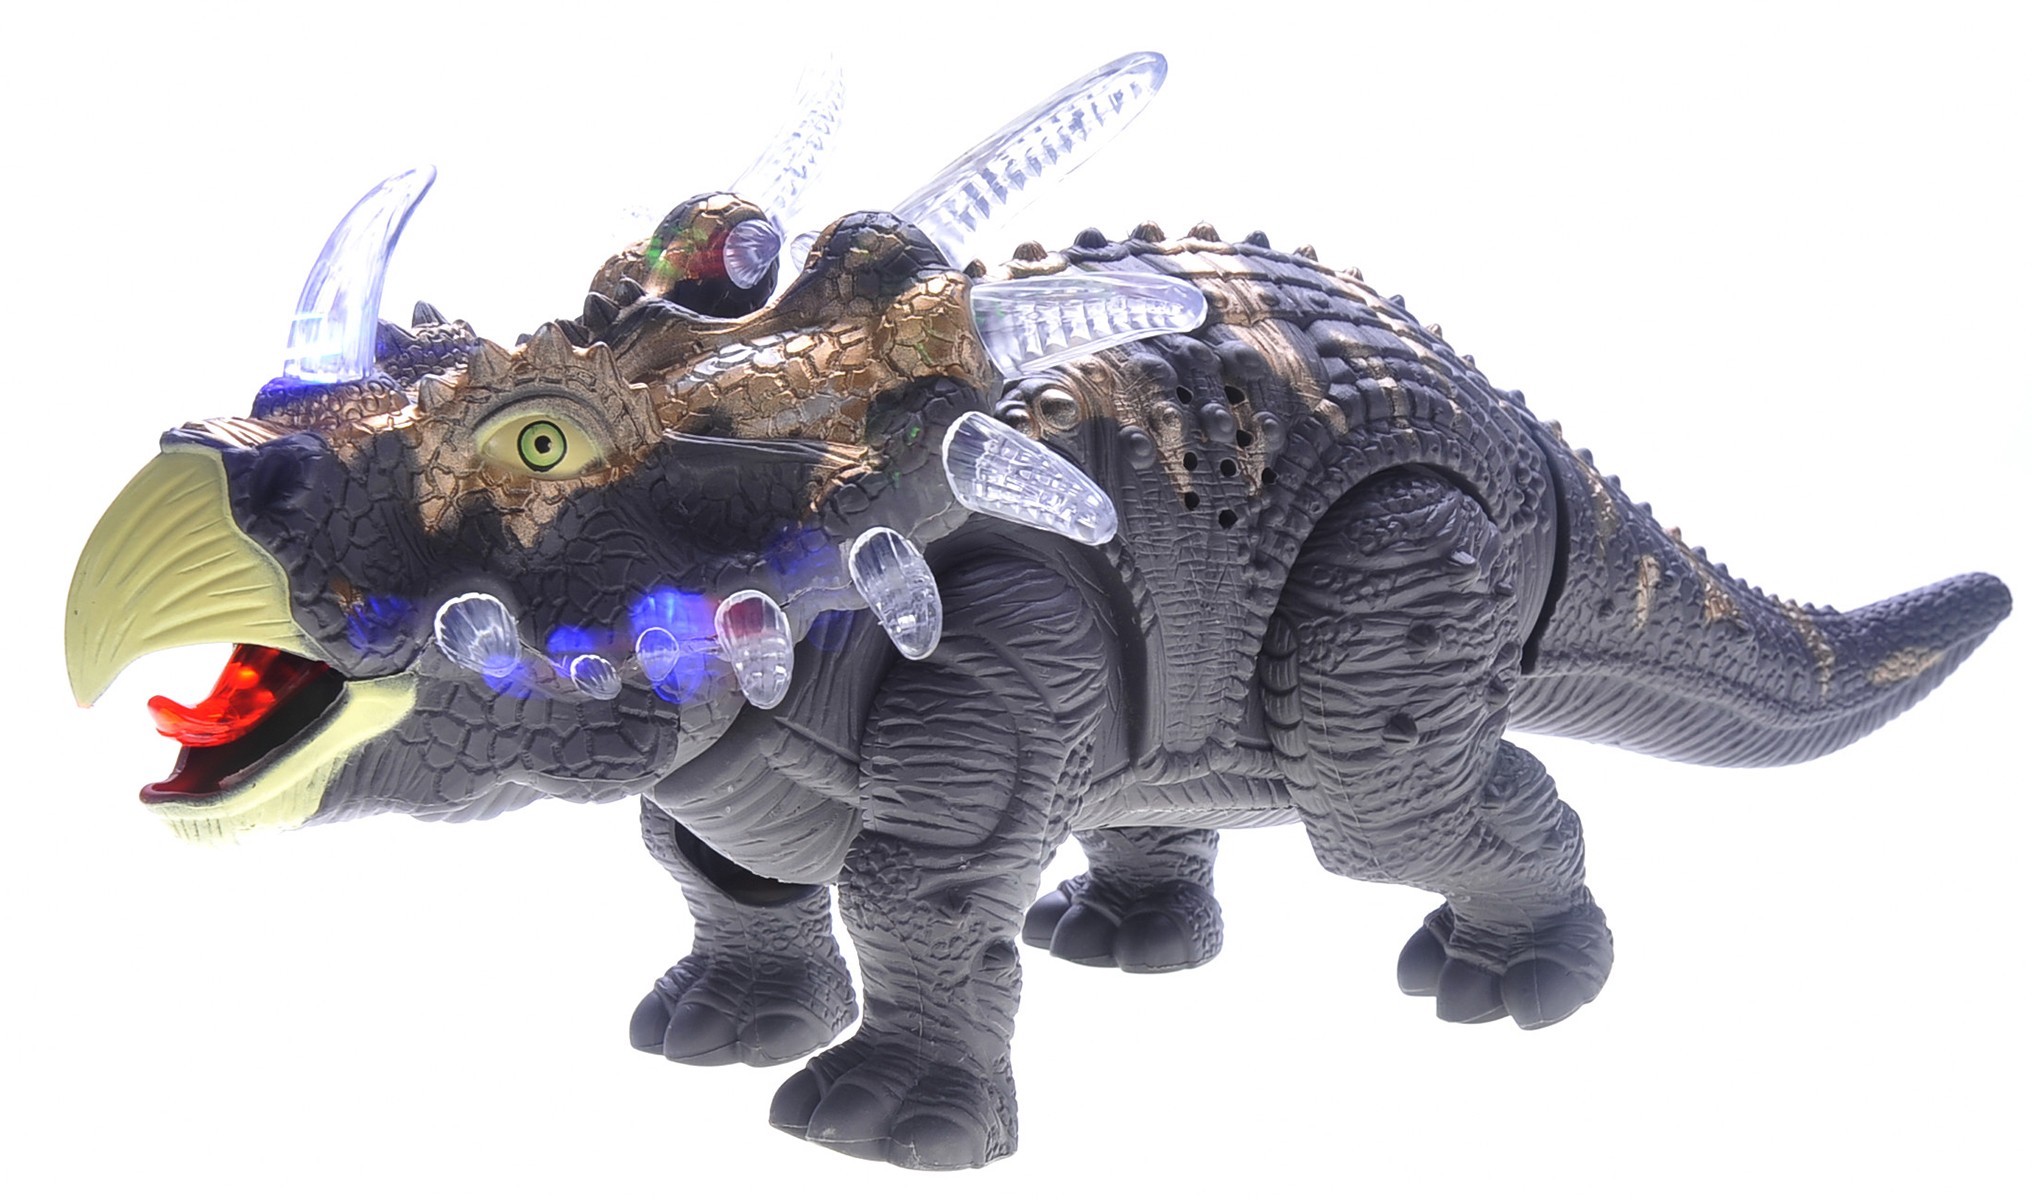 Walking Triceratops Dinosaur Toy With Lights And Sounds (Gray)